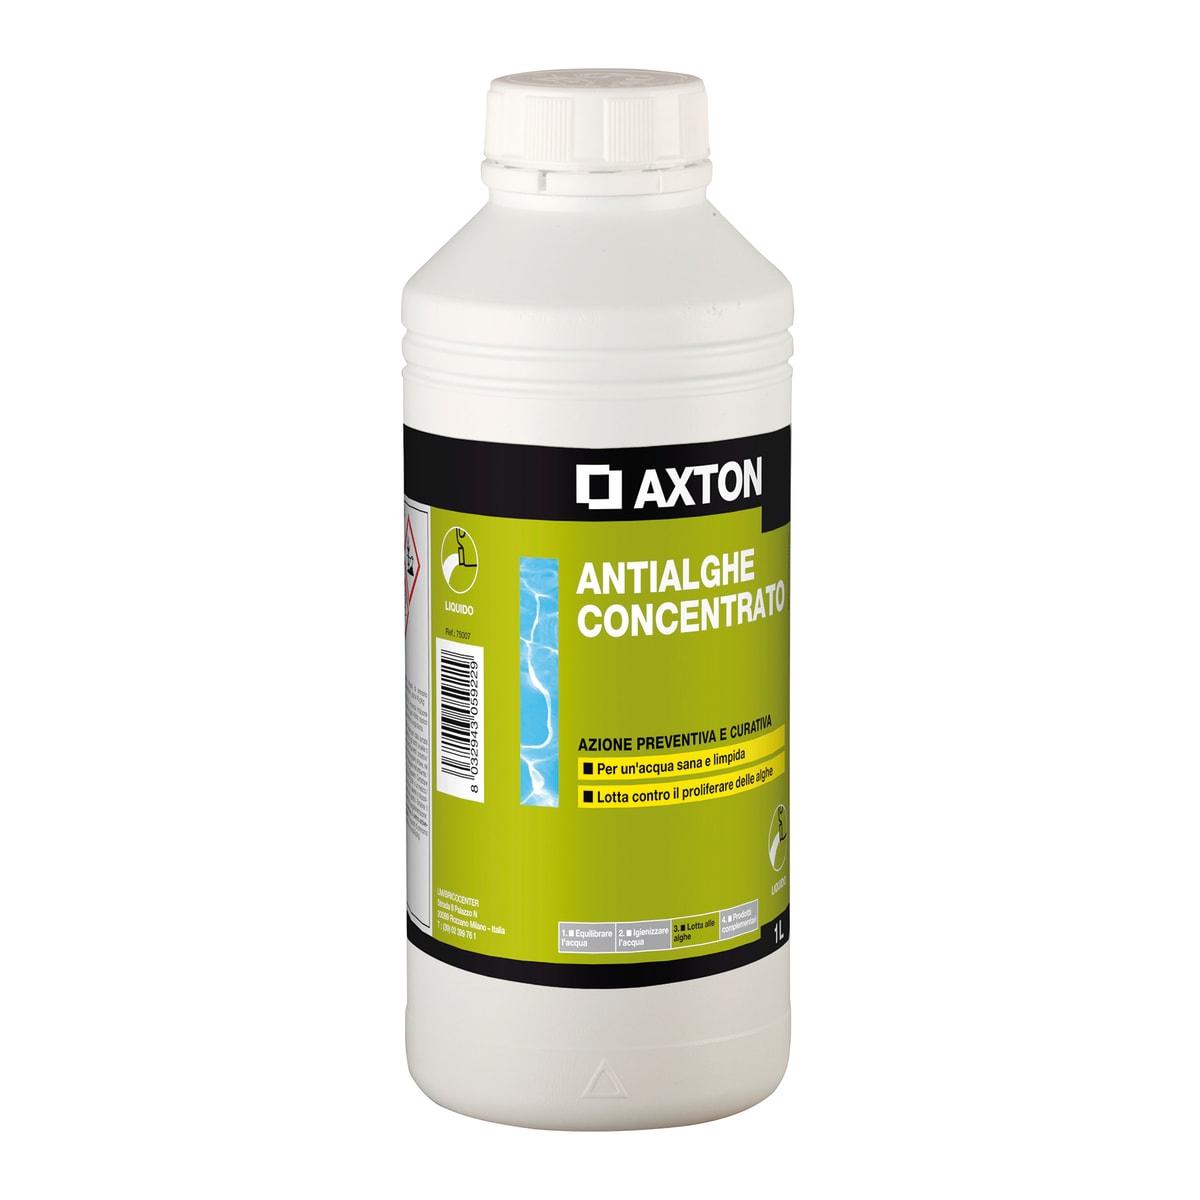 ANTIALGAE CONCENTRATE FOR SWIMMING POOLS 1 LT